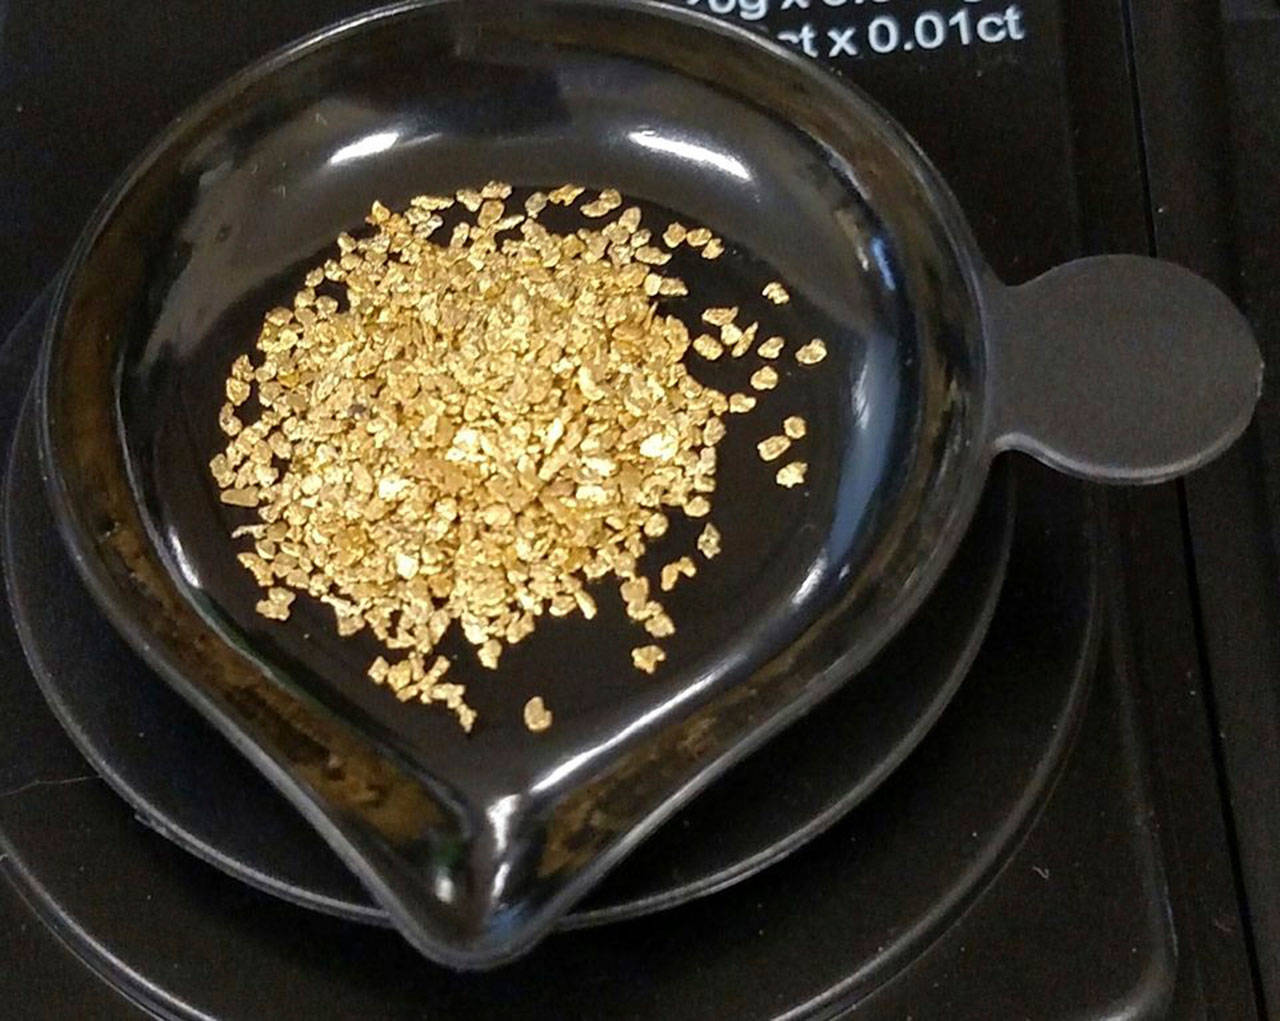 West Coast Mining Supply will be on hand teaching people to pan for gold. (Photo courtesy West Coast Mining Supply)